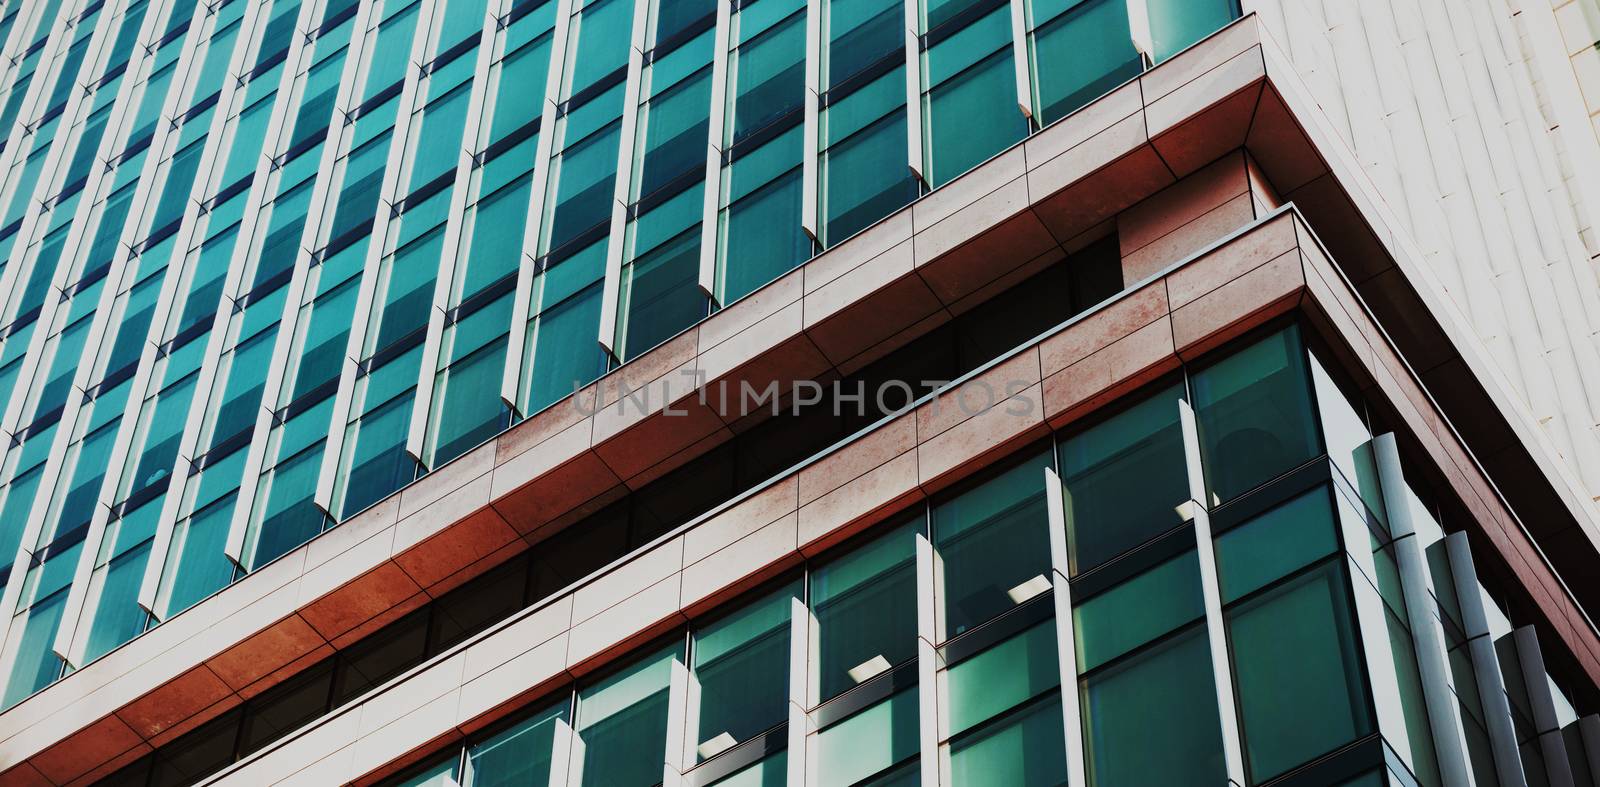 Digitally altered view of modern office building